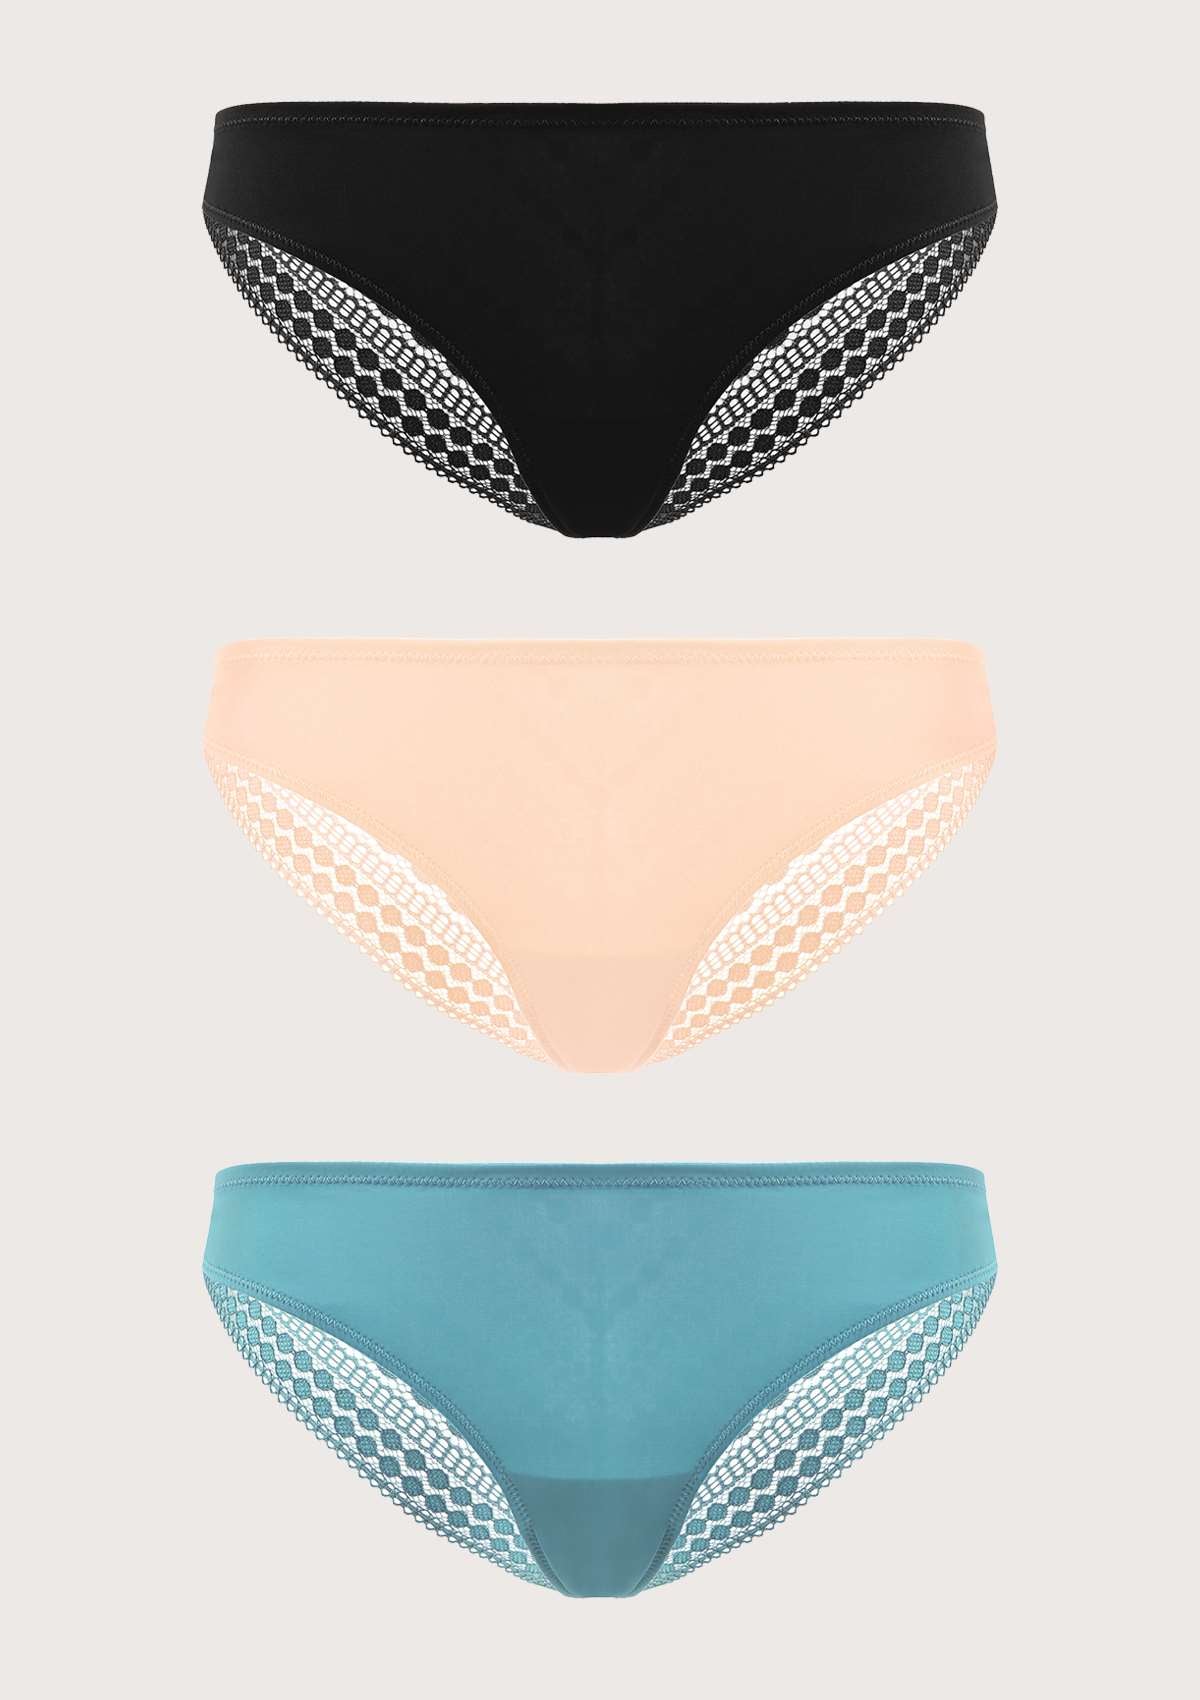 HSIA Polka Dot Super Soft Lace Back Cheeky Panties 3 Pack - XL / Black+Rose Cloud+Brittany Blue